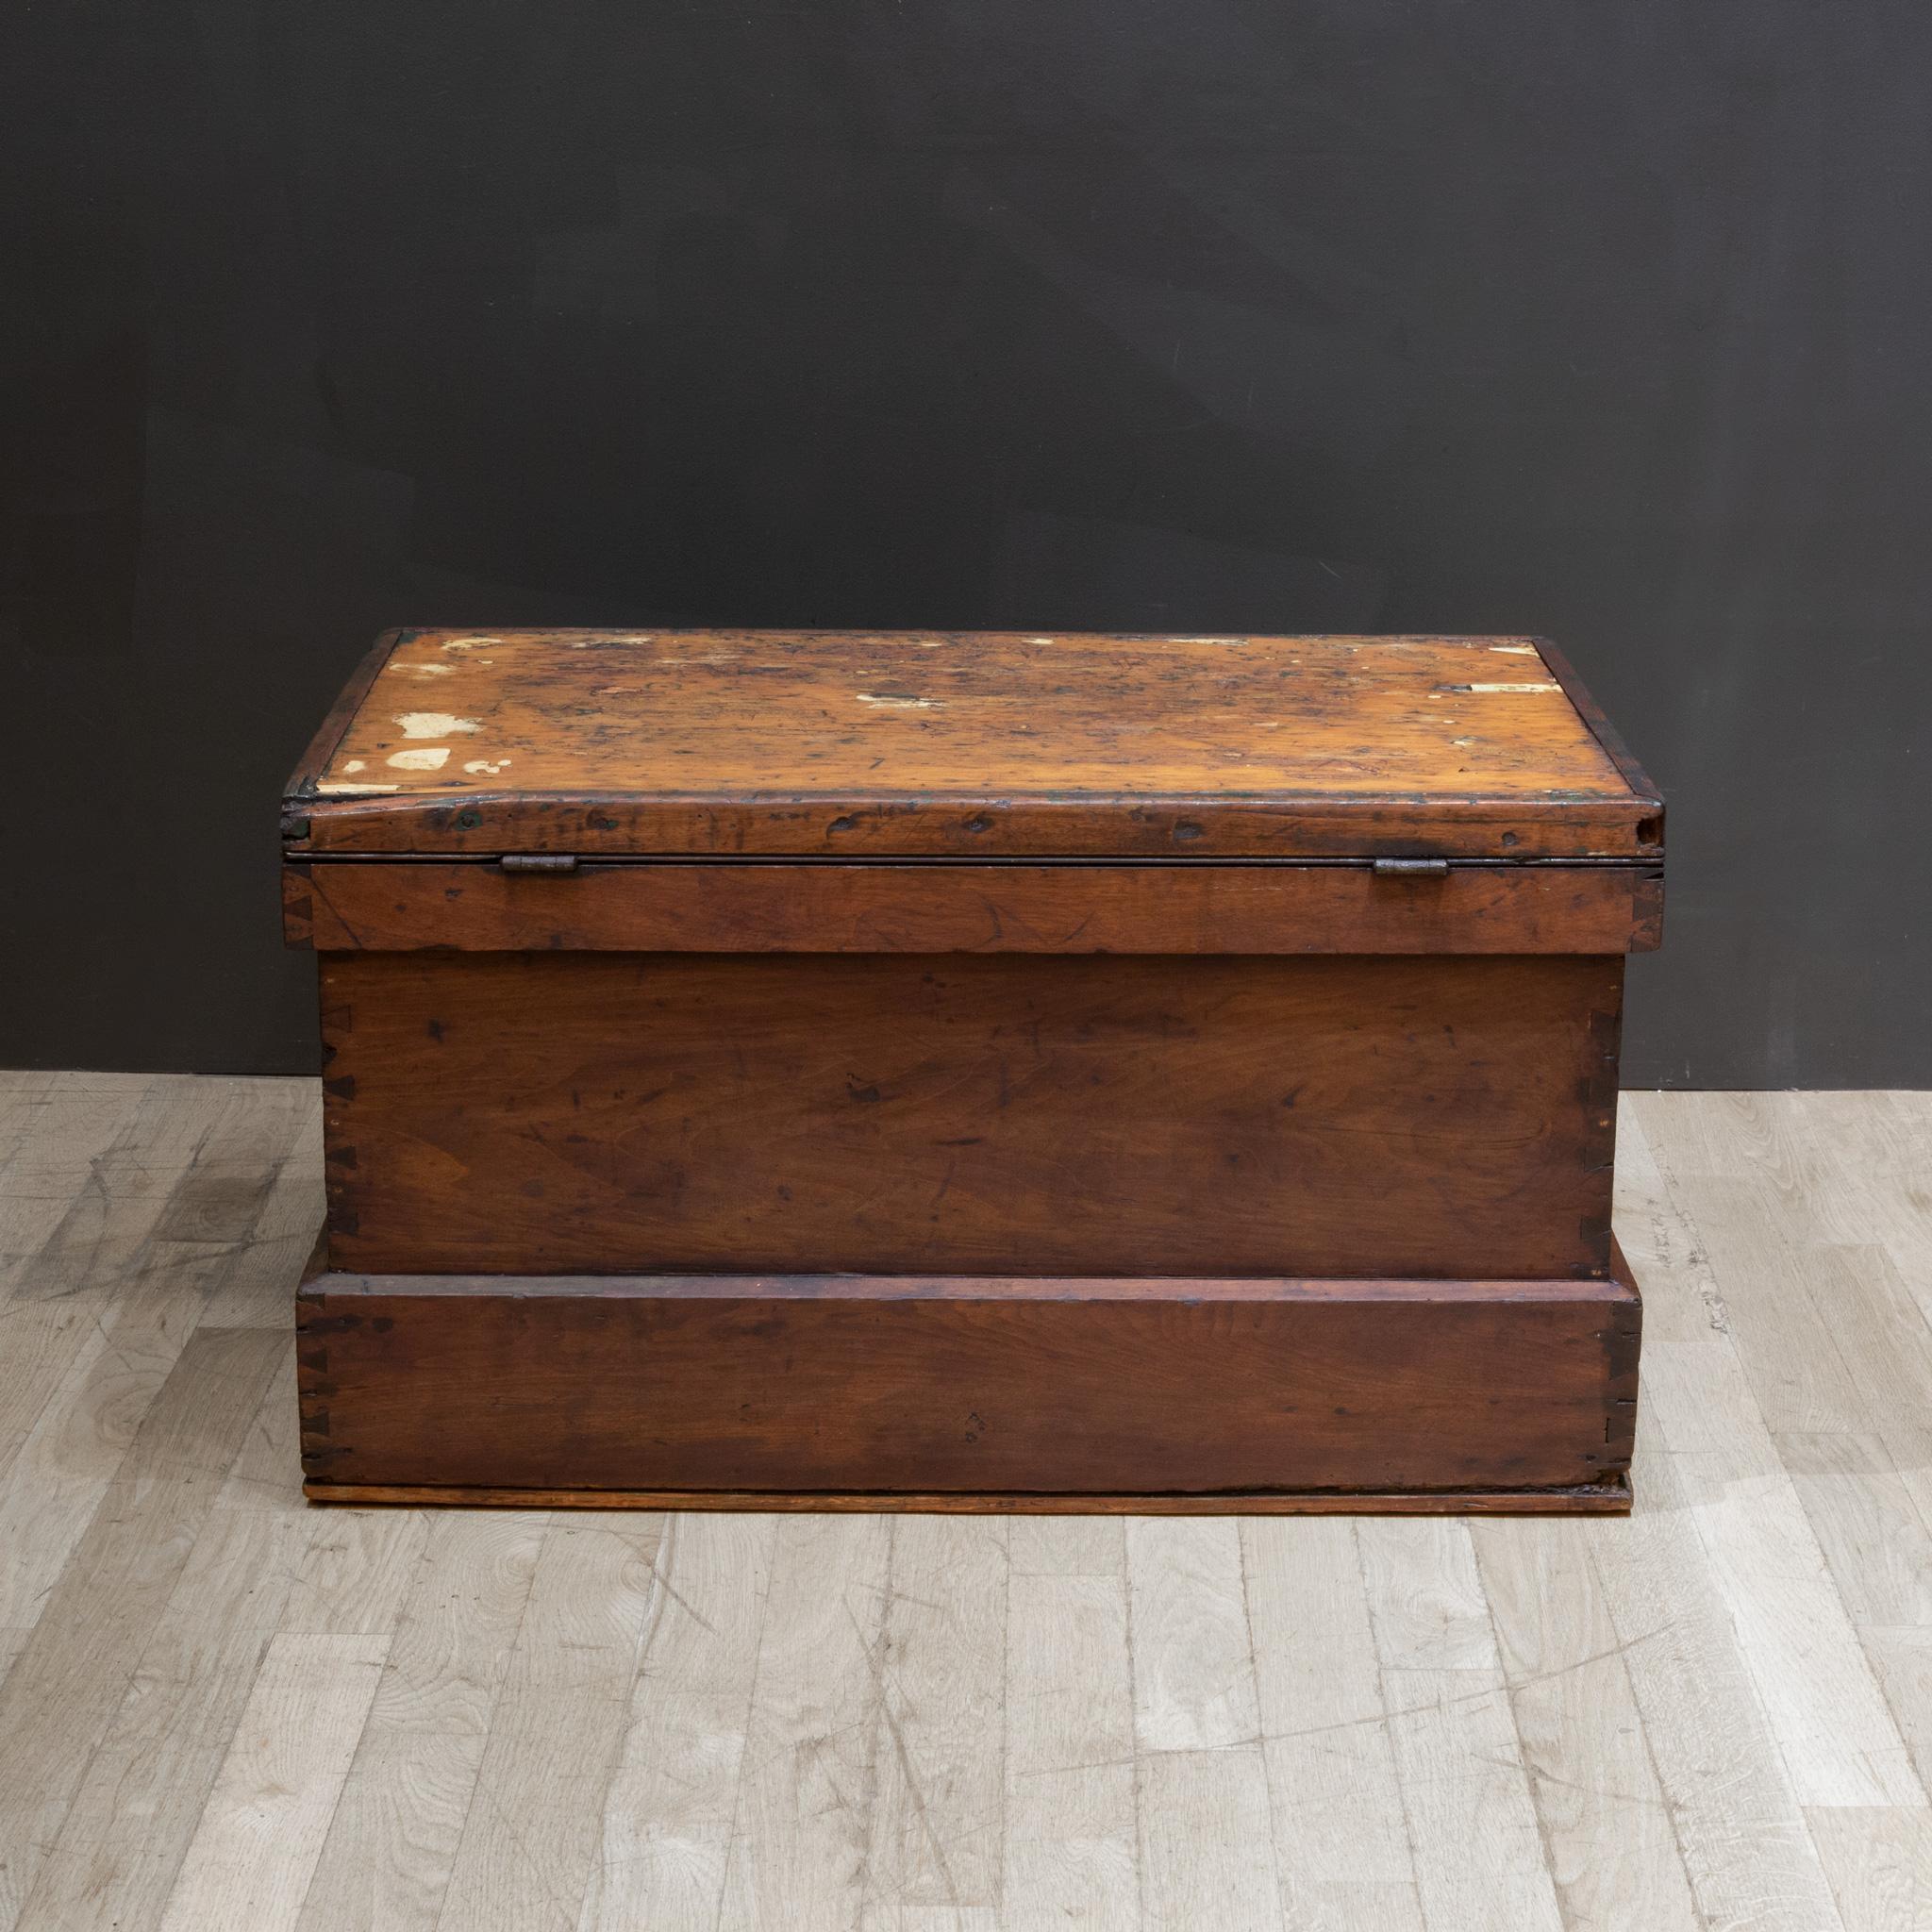 Steel Late 19th / Early 20th C. Blanket Chest, C.1880-1920